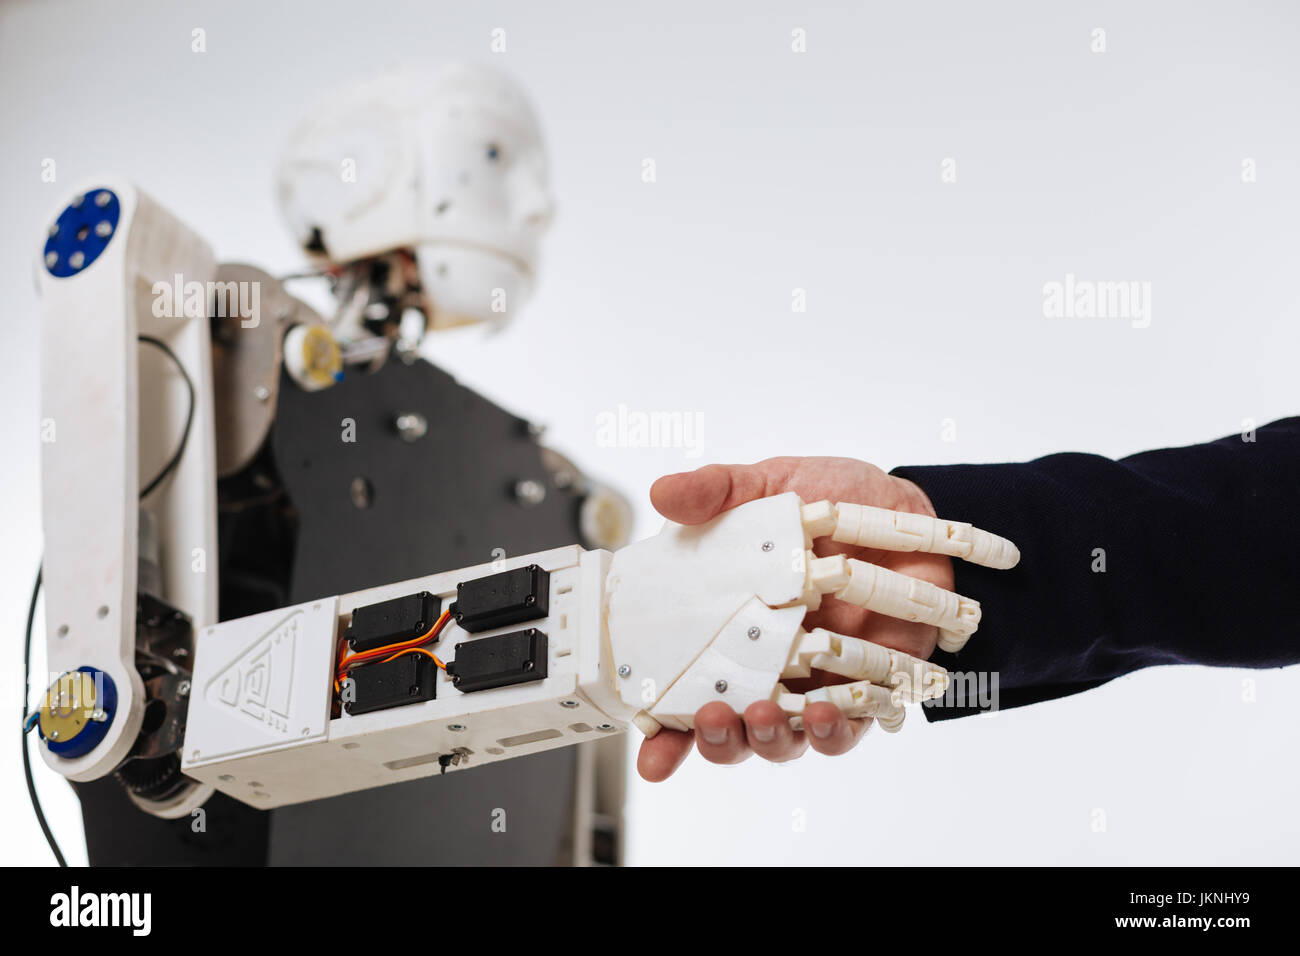 White elaborate robot shaking hands with human Stock Photo